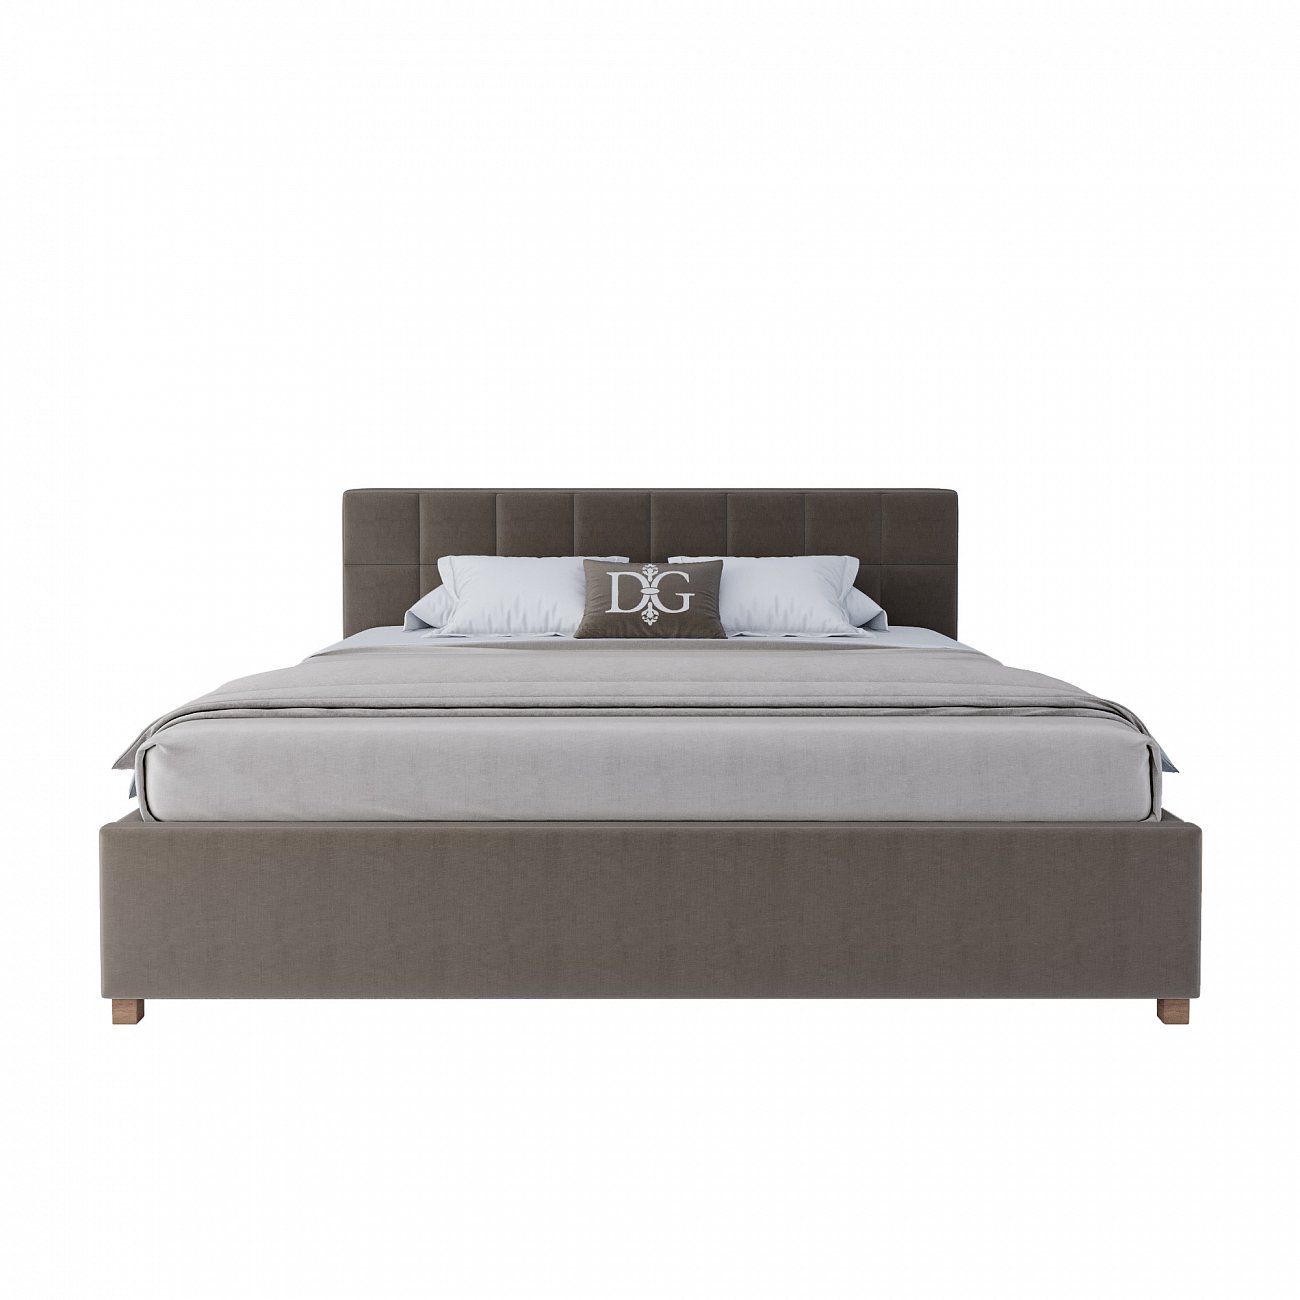 Double bed 180x200 cm grey-brown Wales